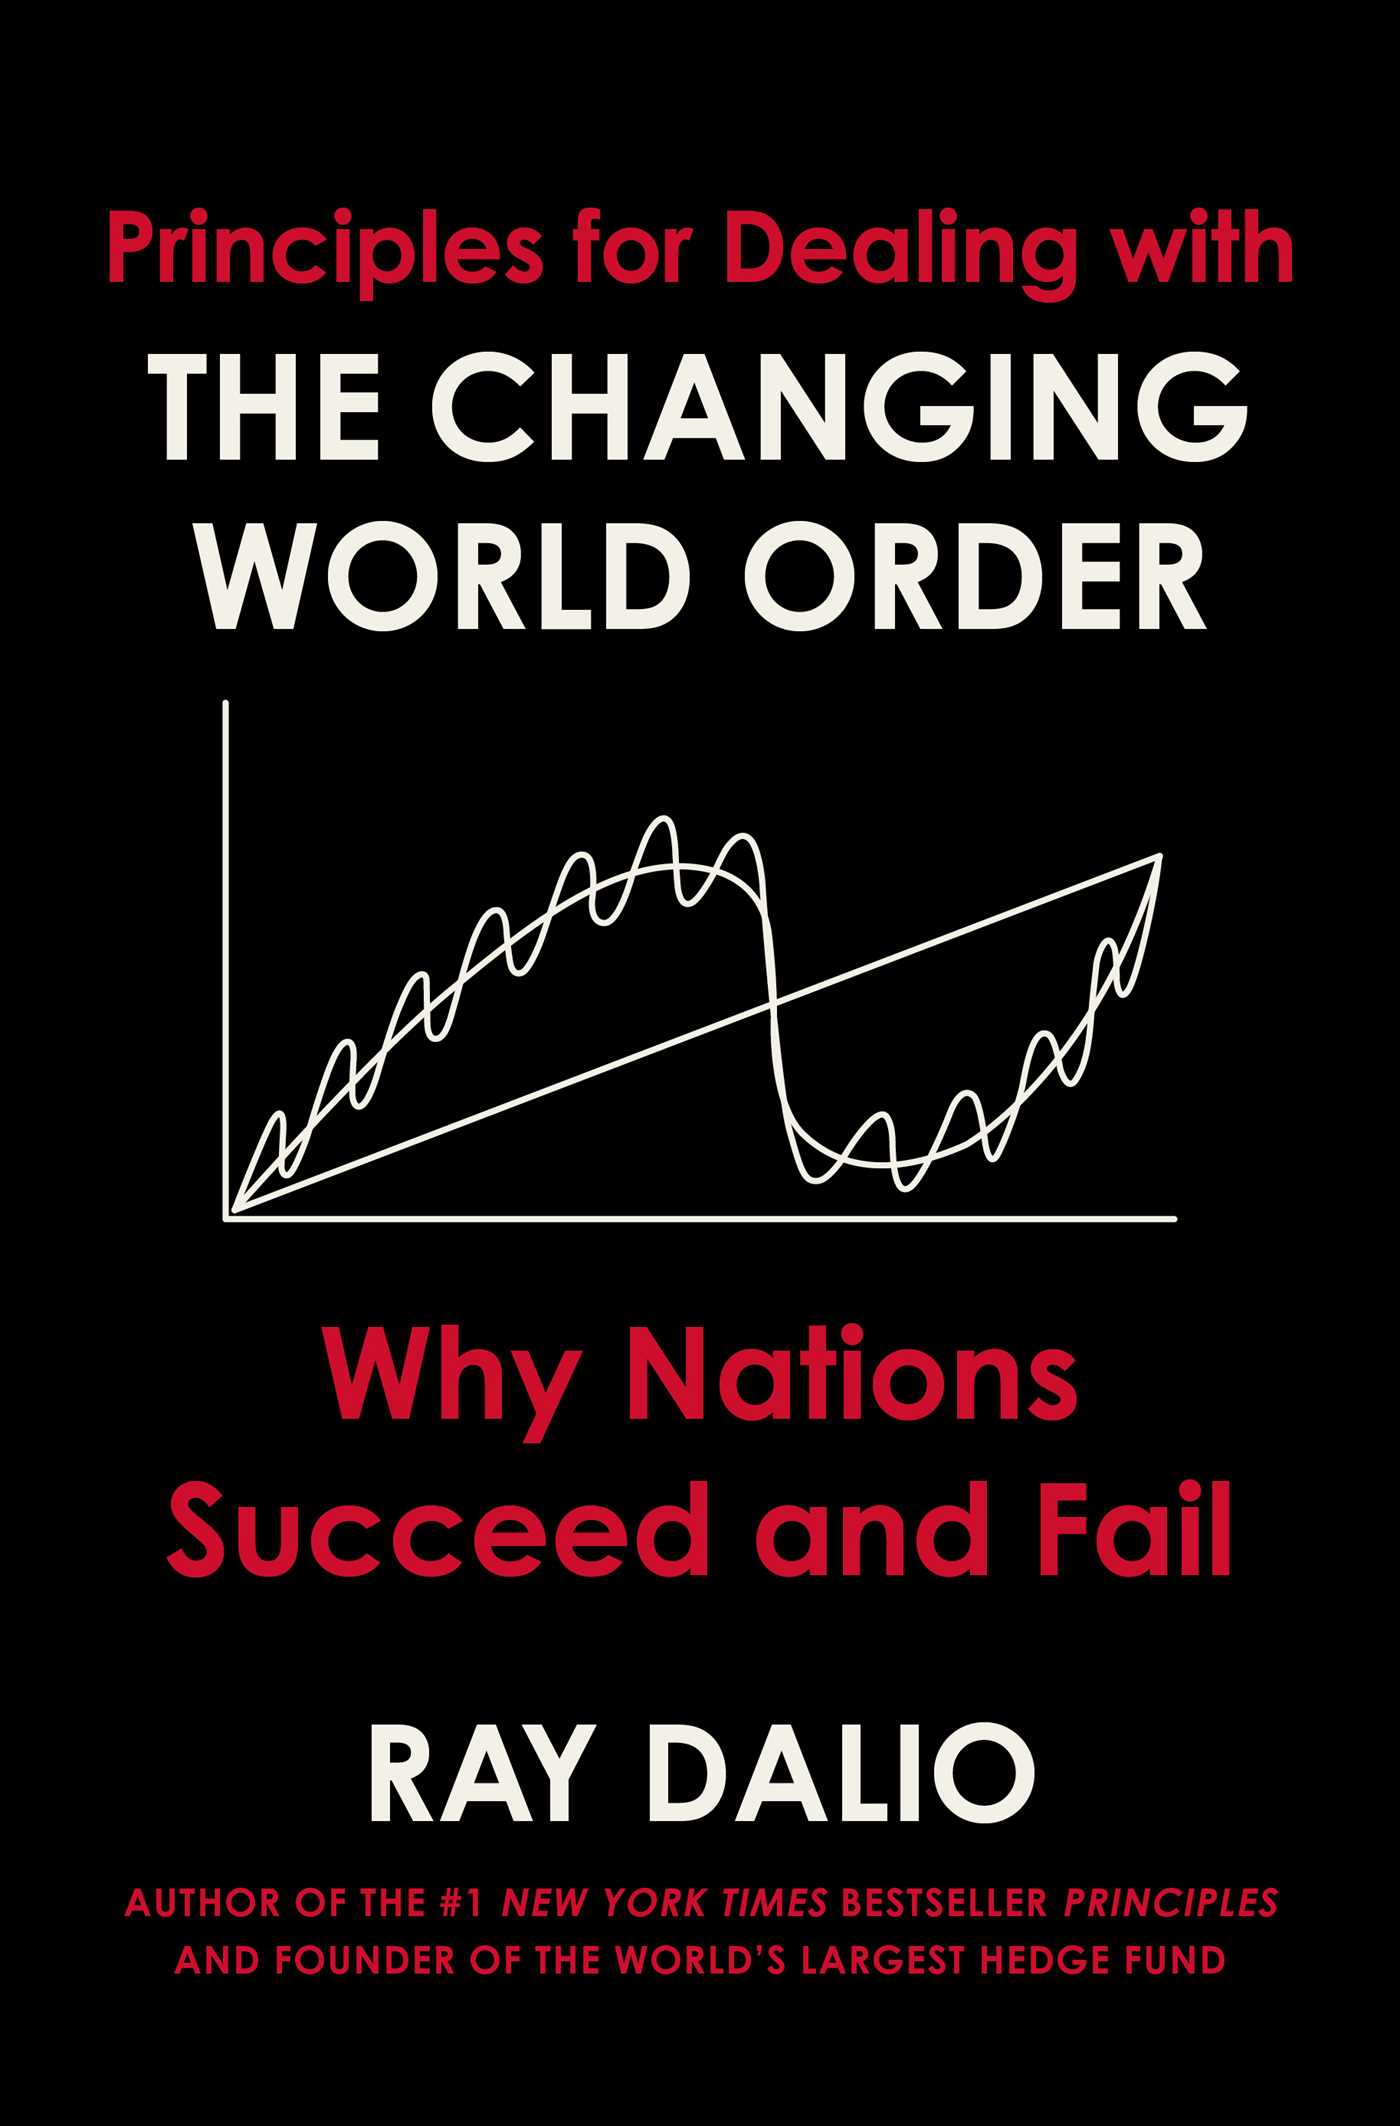 Principles For Dealing With the Changing World Order Book Summary